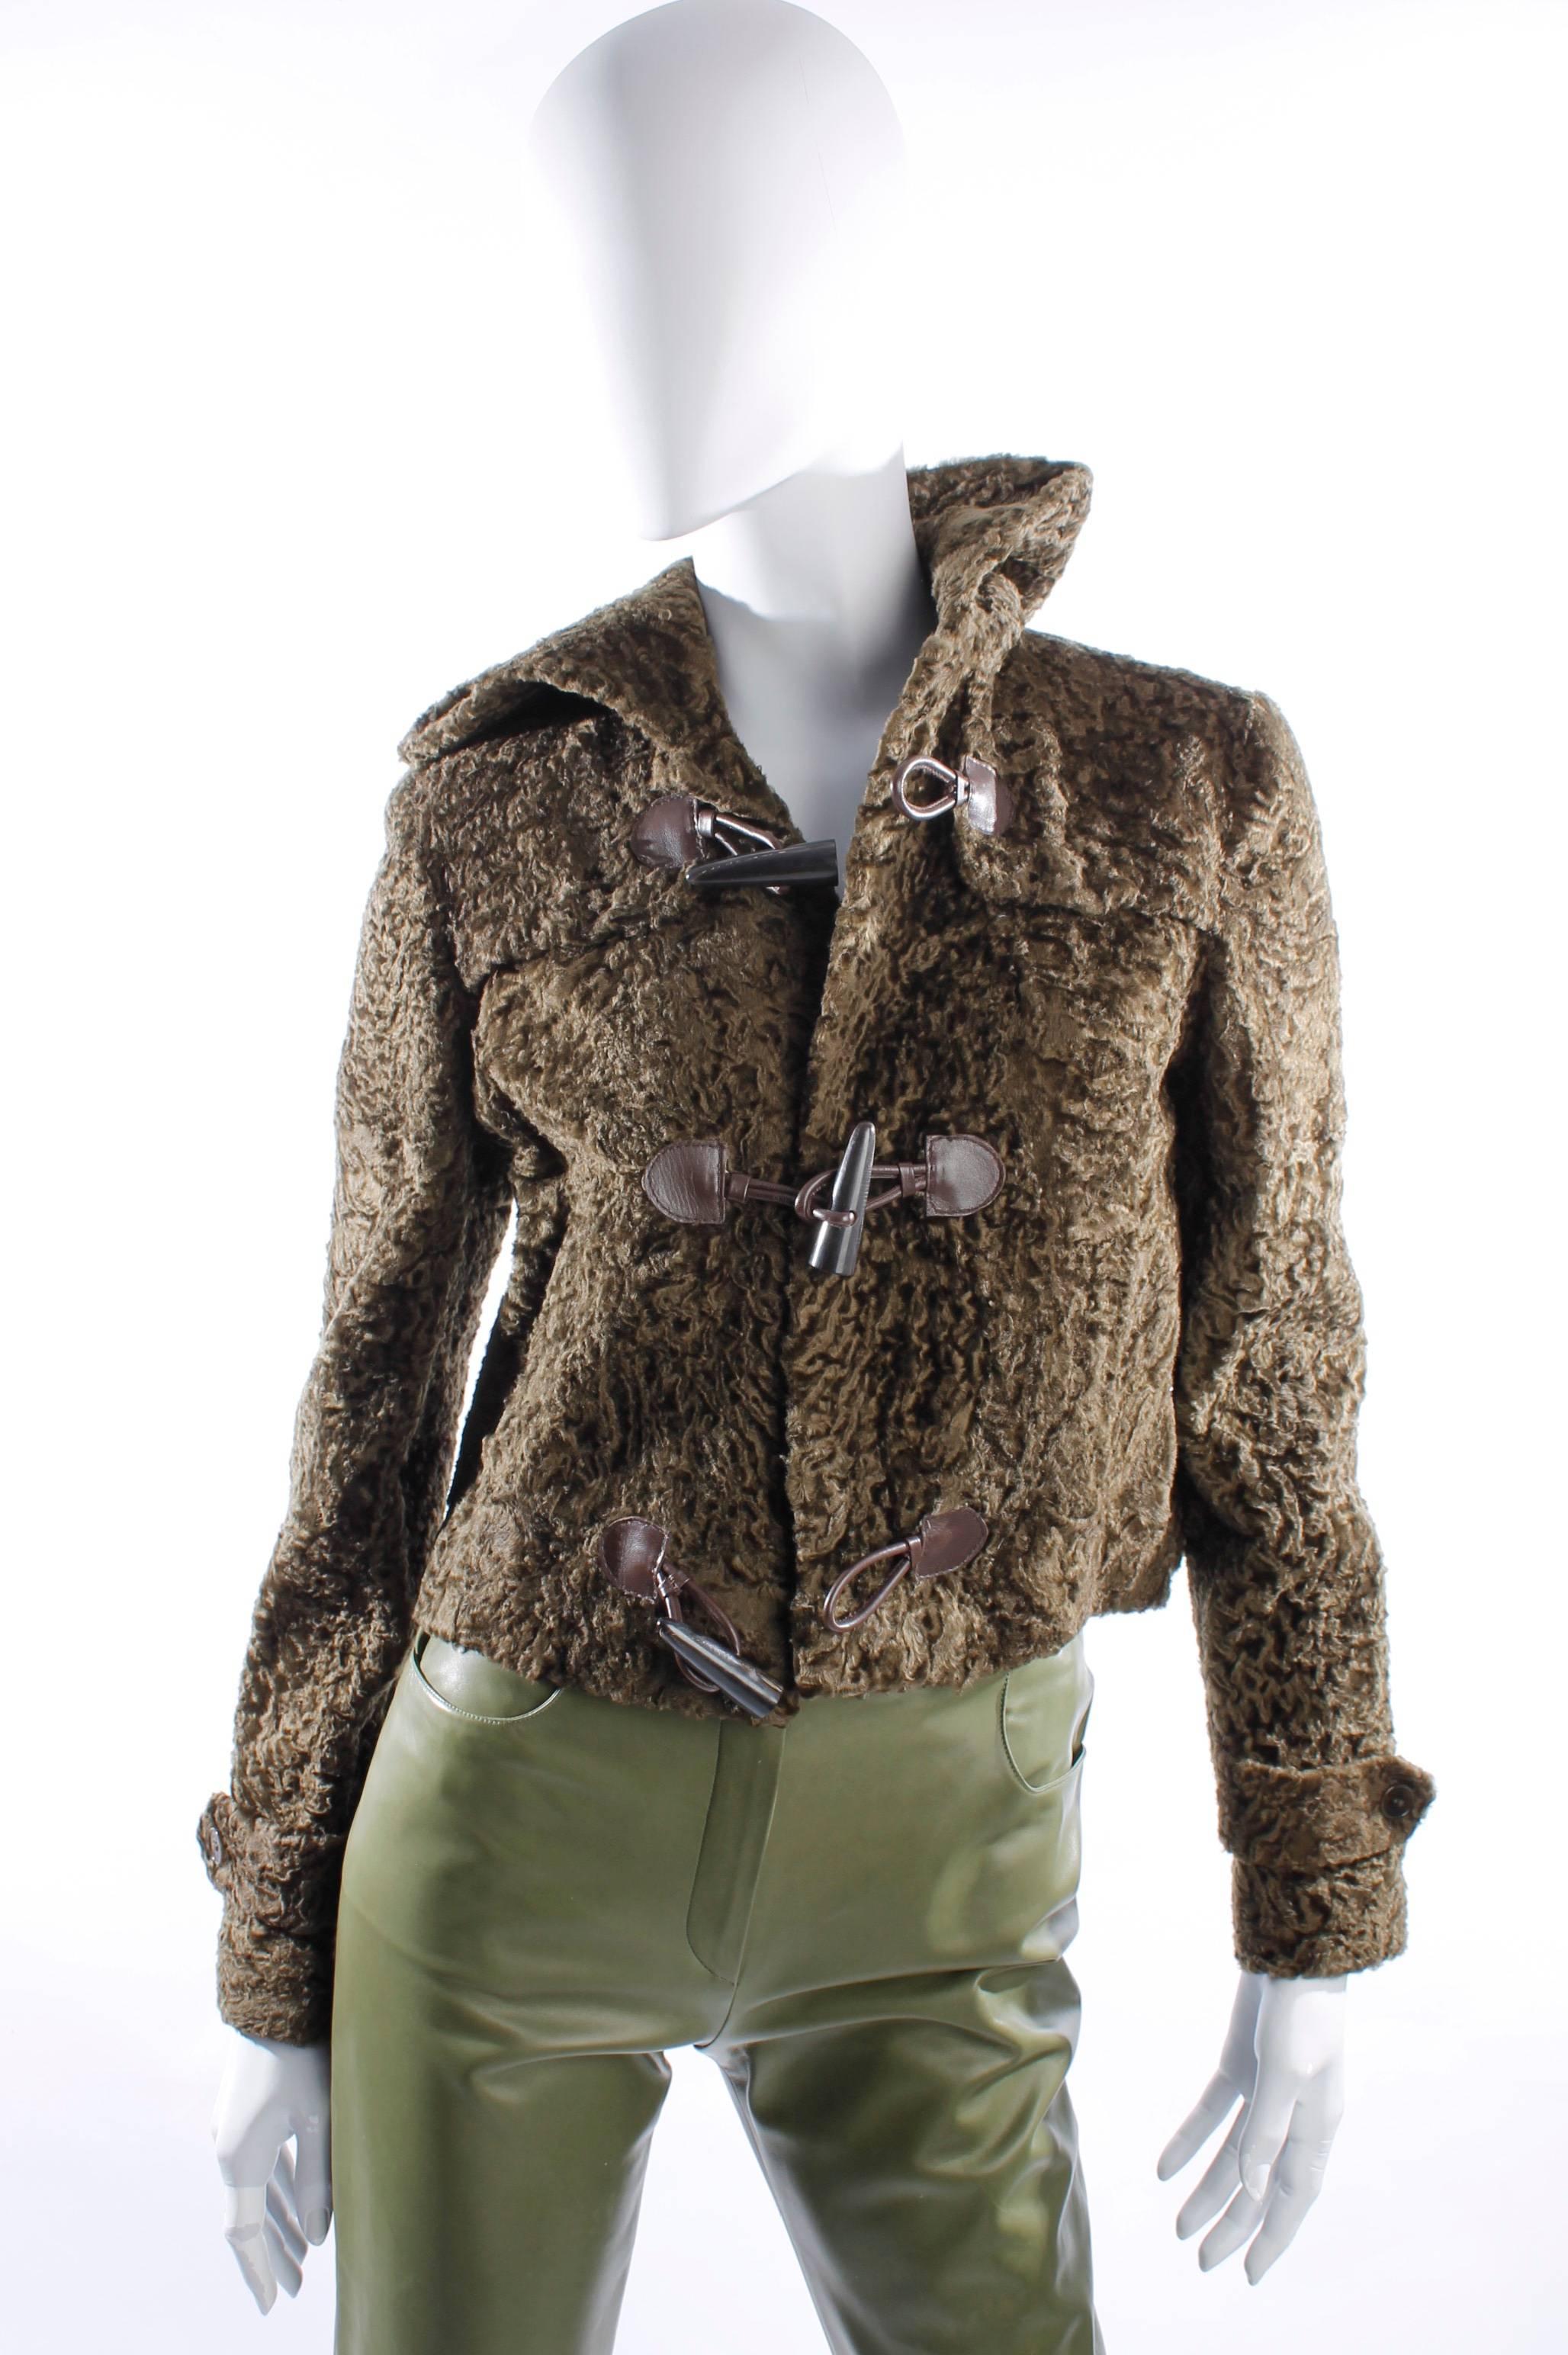 Cropped fur coat by Ralph Lauren in olive green with a hoodie and toggle fastening.

This jacket is lined with shiny green fabric. Two slit pockets above the hip and decoration-straps at the end of the sleeves.

Fully made of lambs fur.

Made